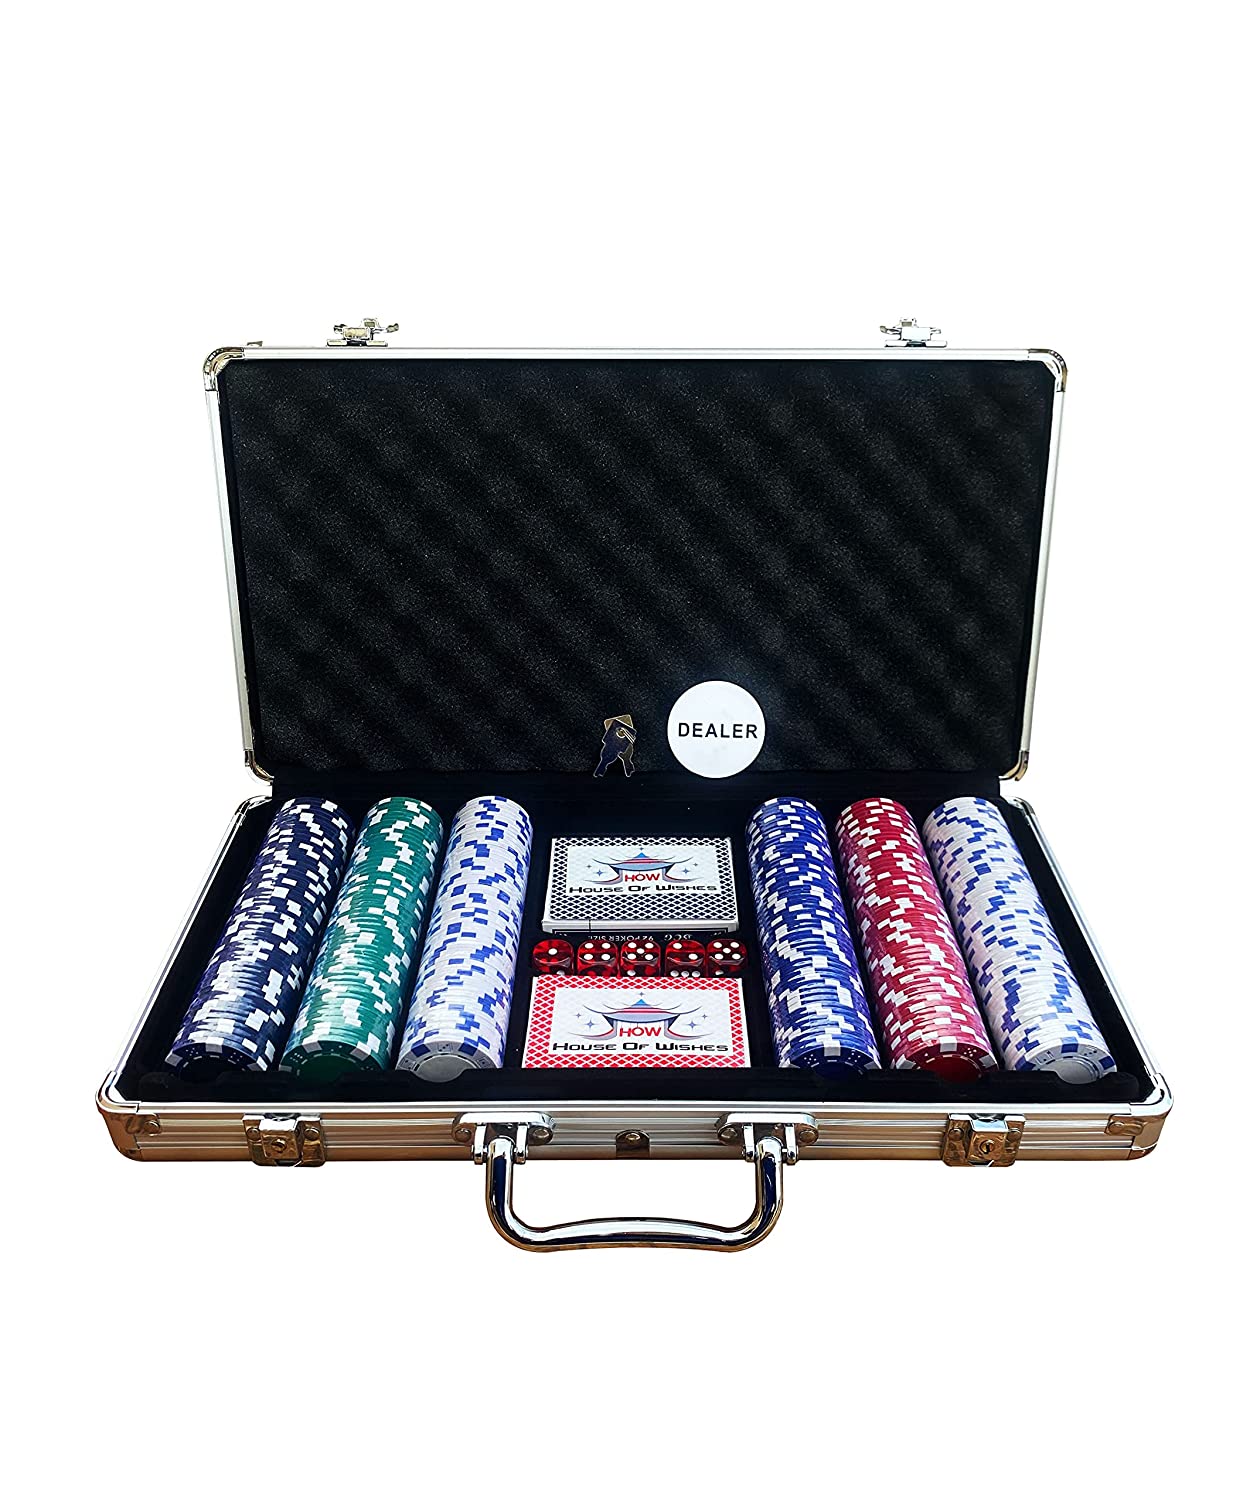 HOW (HOUSE OF WISHES) with Device Casino Style 300 Poker Chips/Coins Set (Aluminium Case Safe Pack)